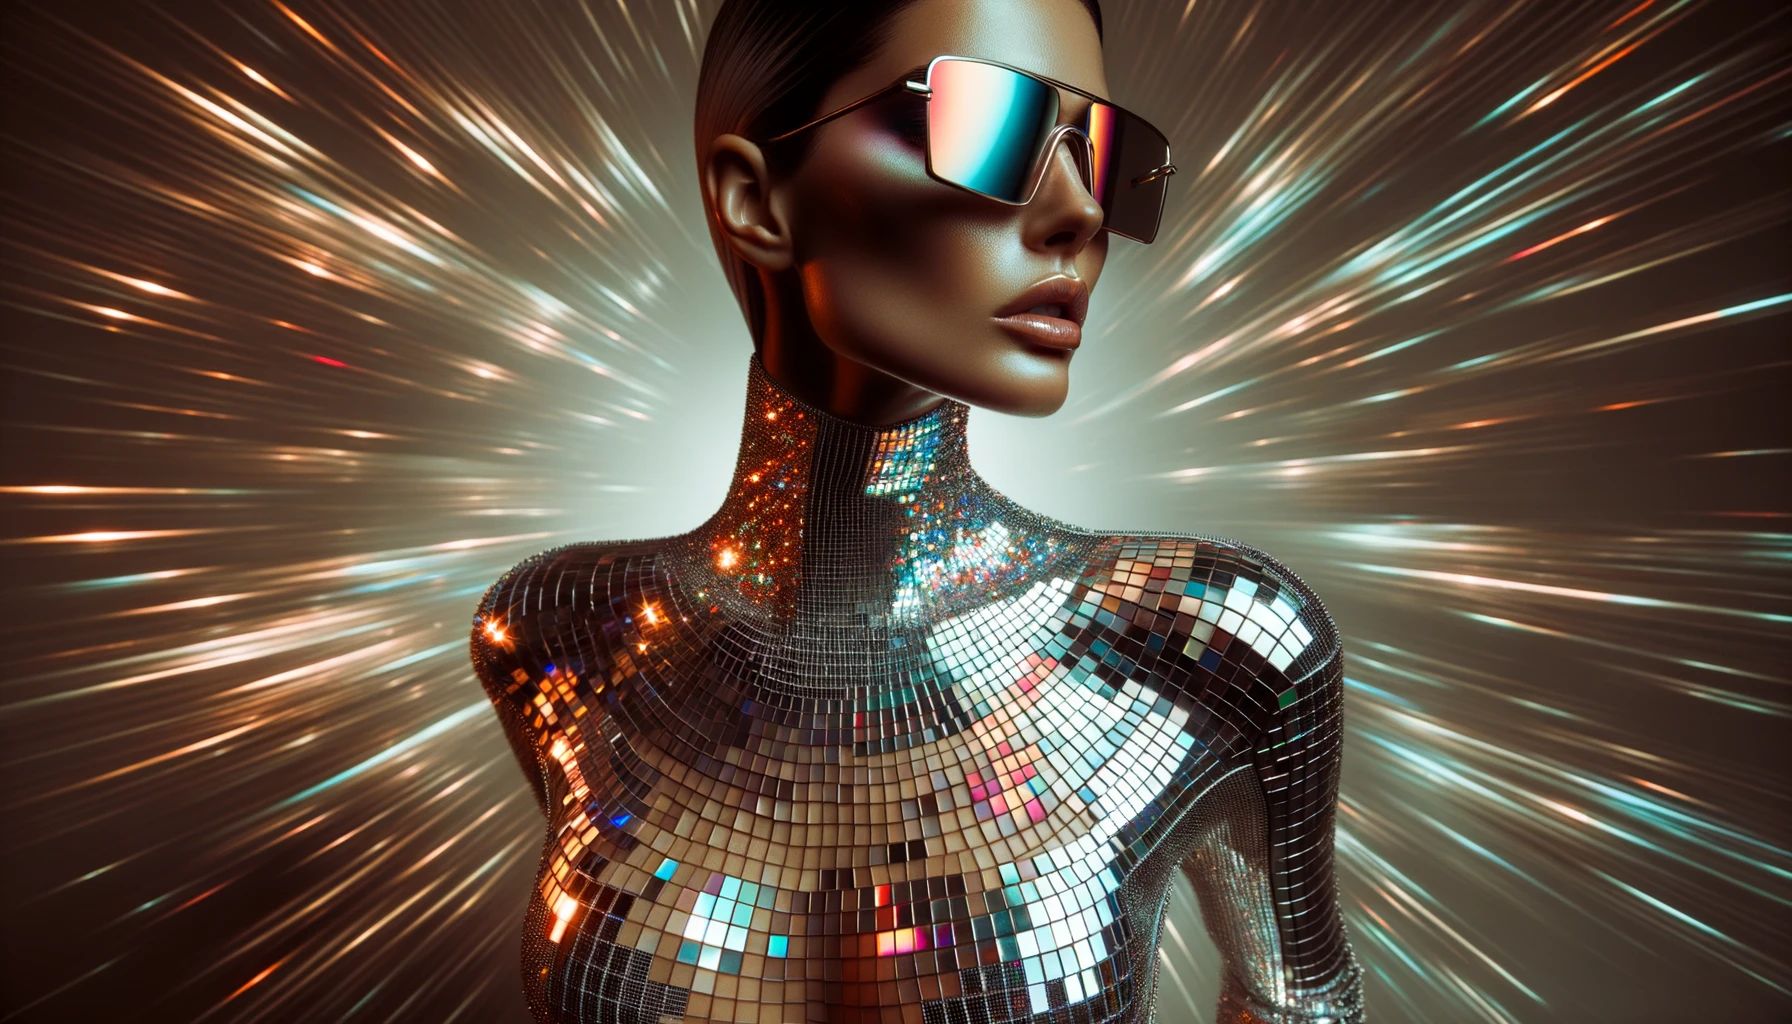 Attractive young woman in futuristic outfit Poster by MIRO3D